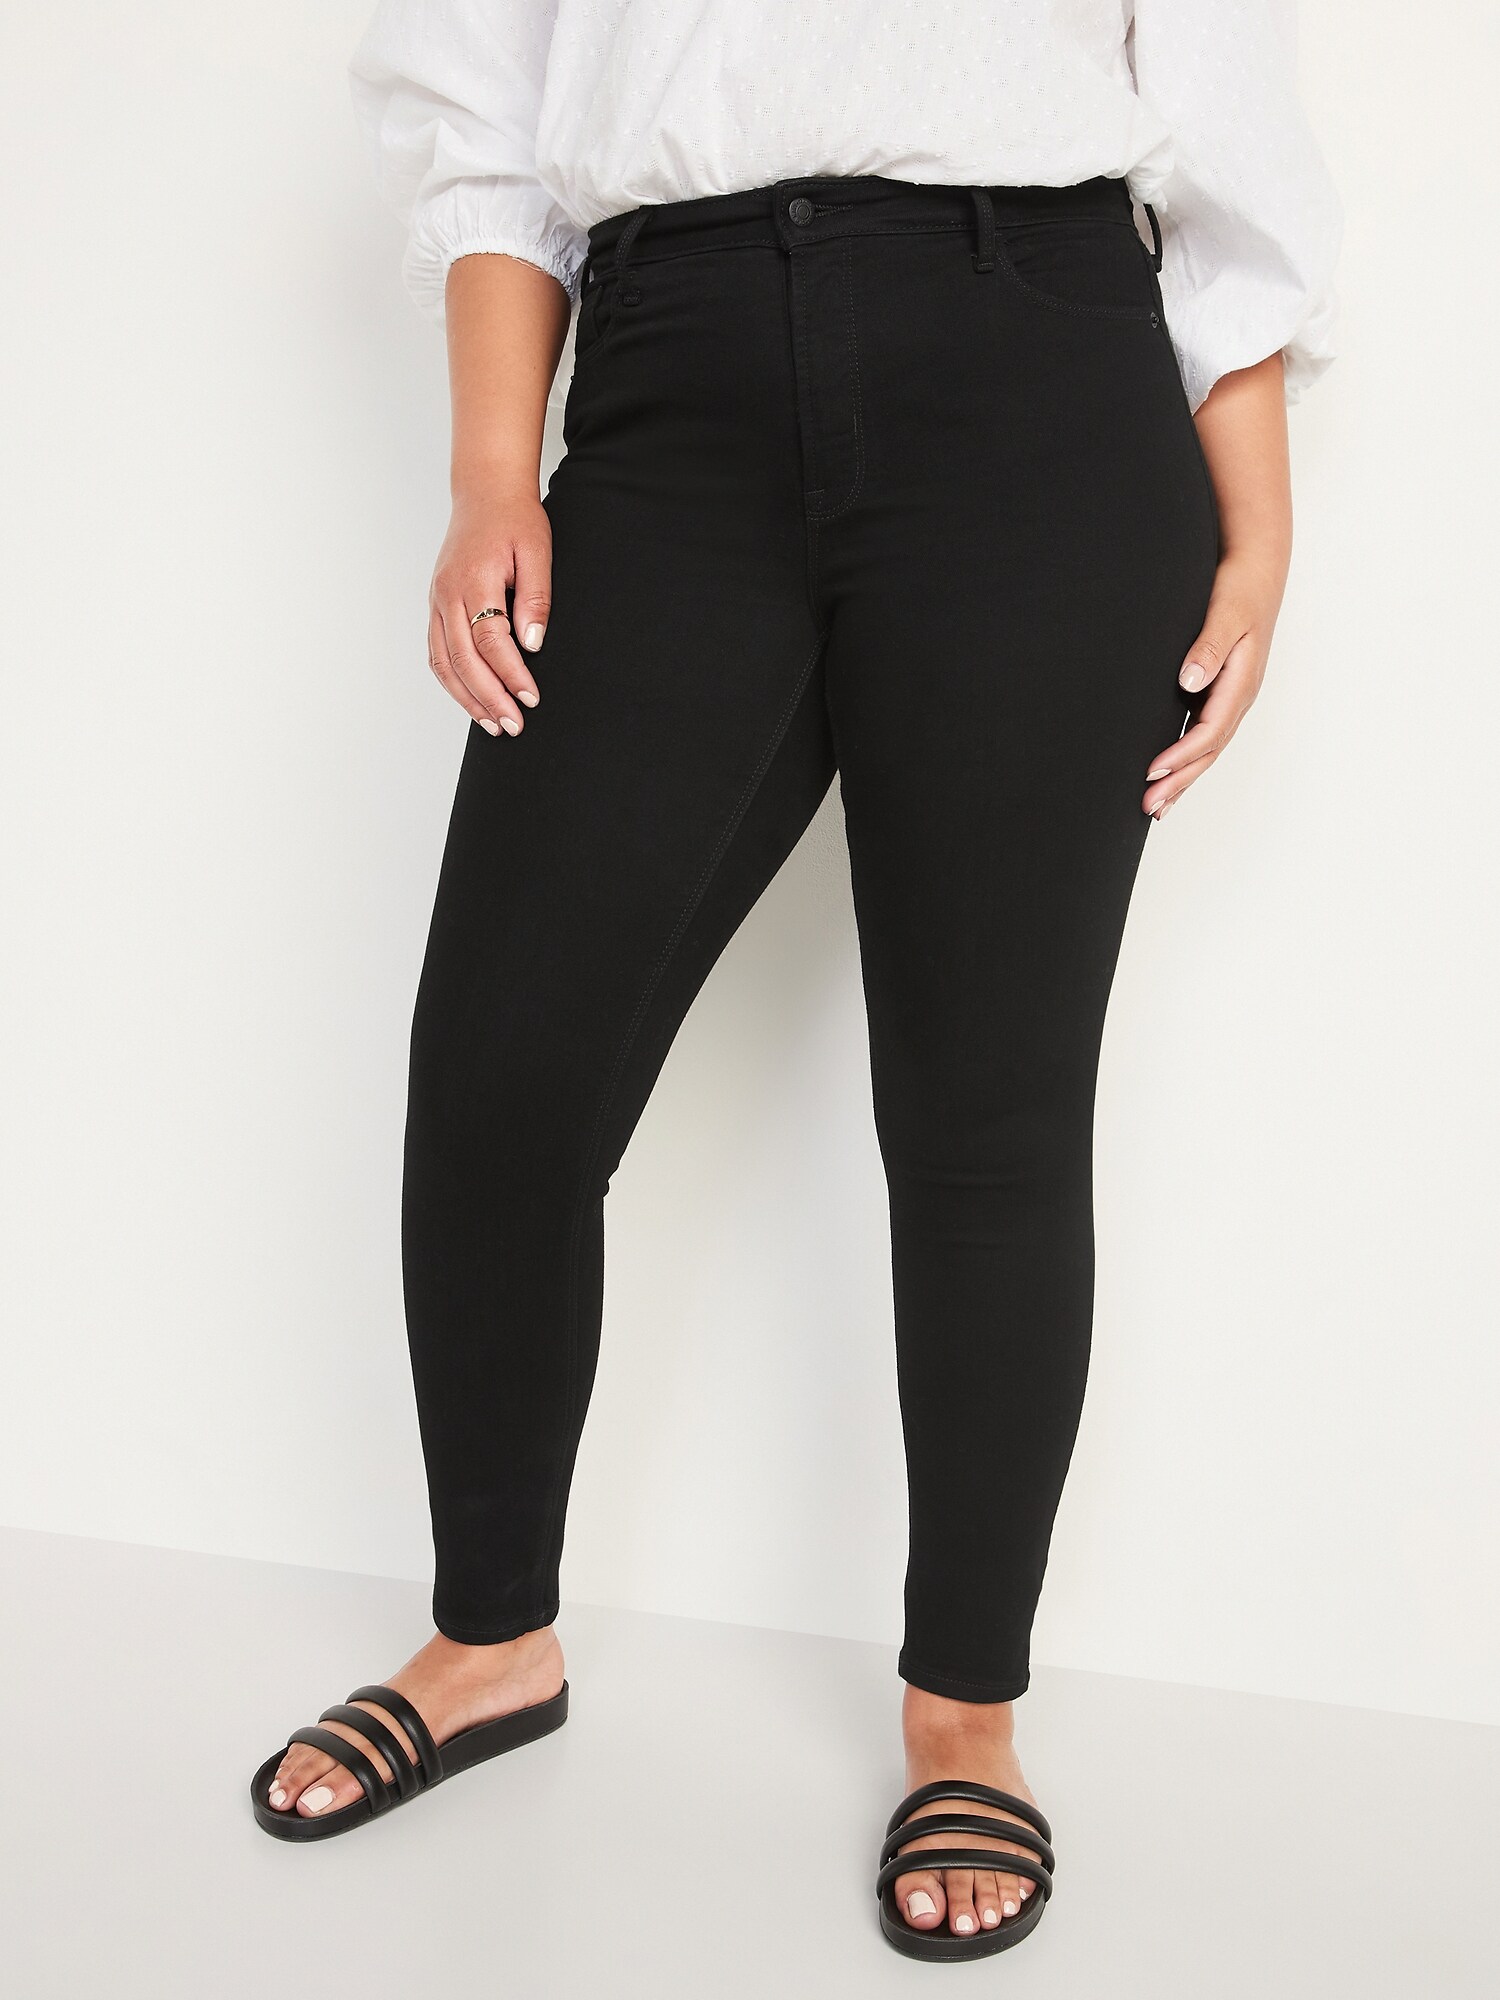 High-Waisted Rockstar Super Skinny Jeans For Women | Old Navy